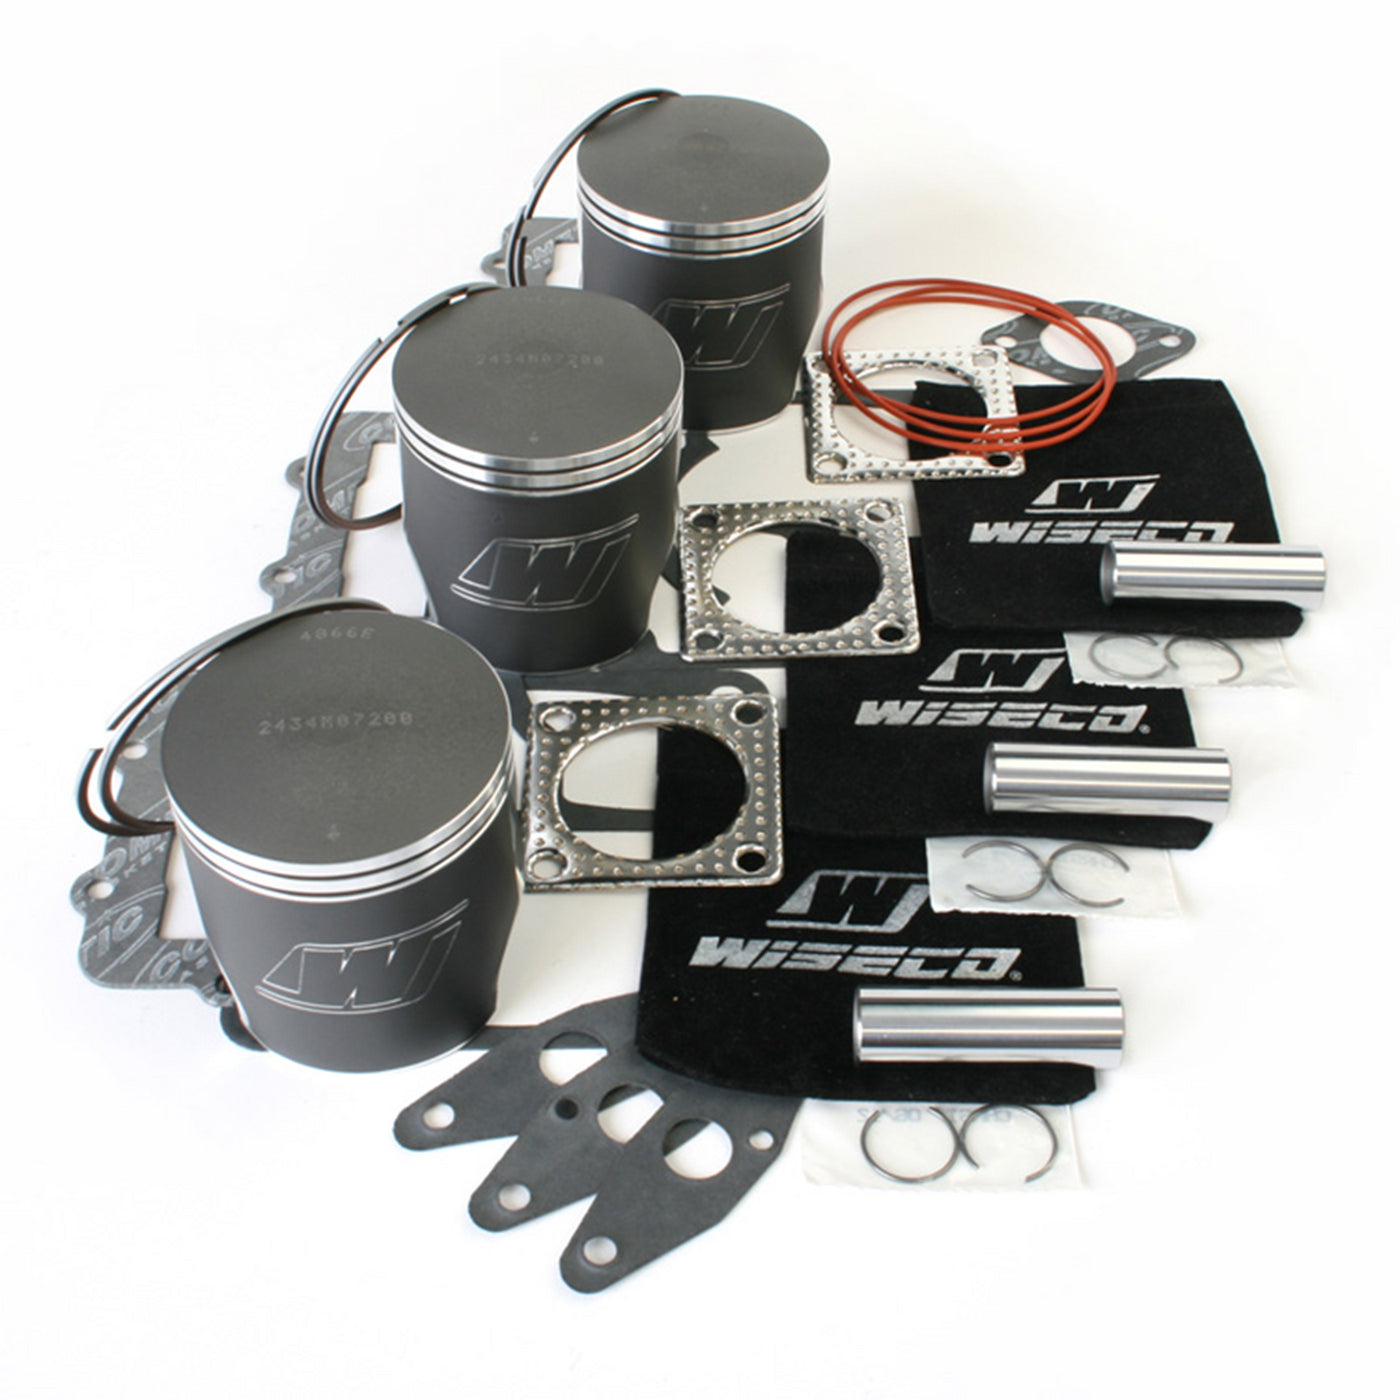 Wiseco SK1241 Snowmobile Piston And Kit #SK1241